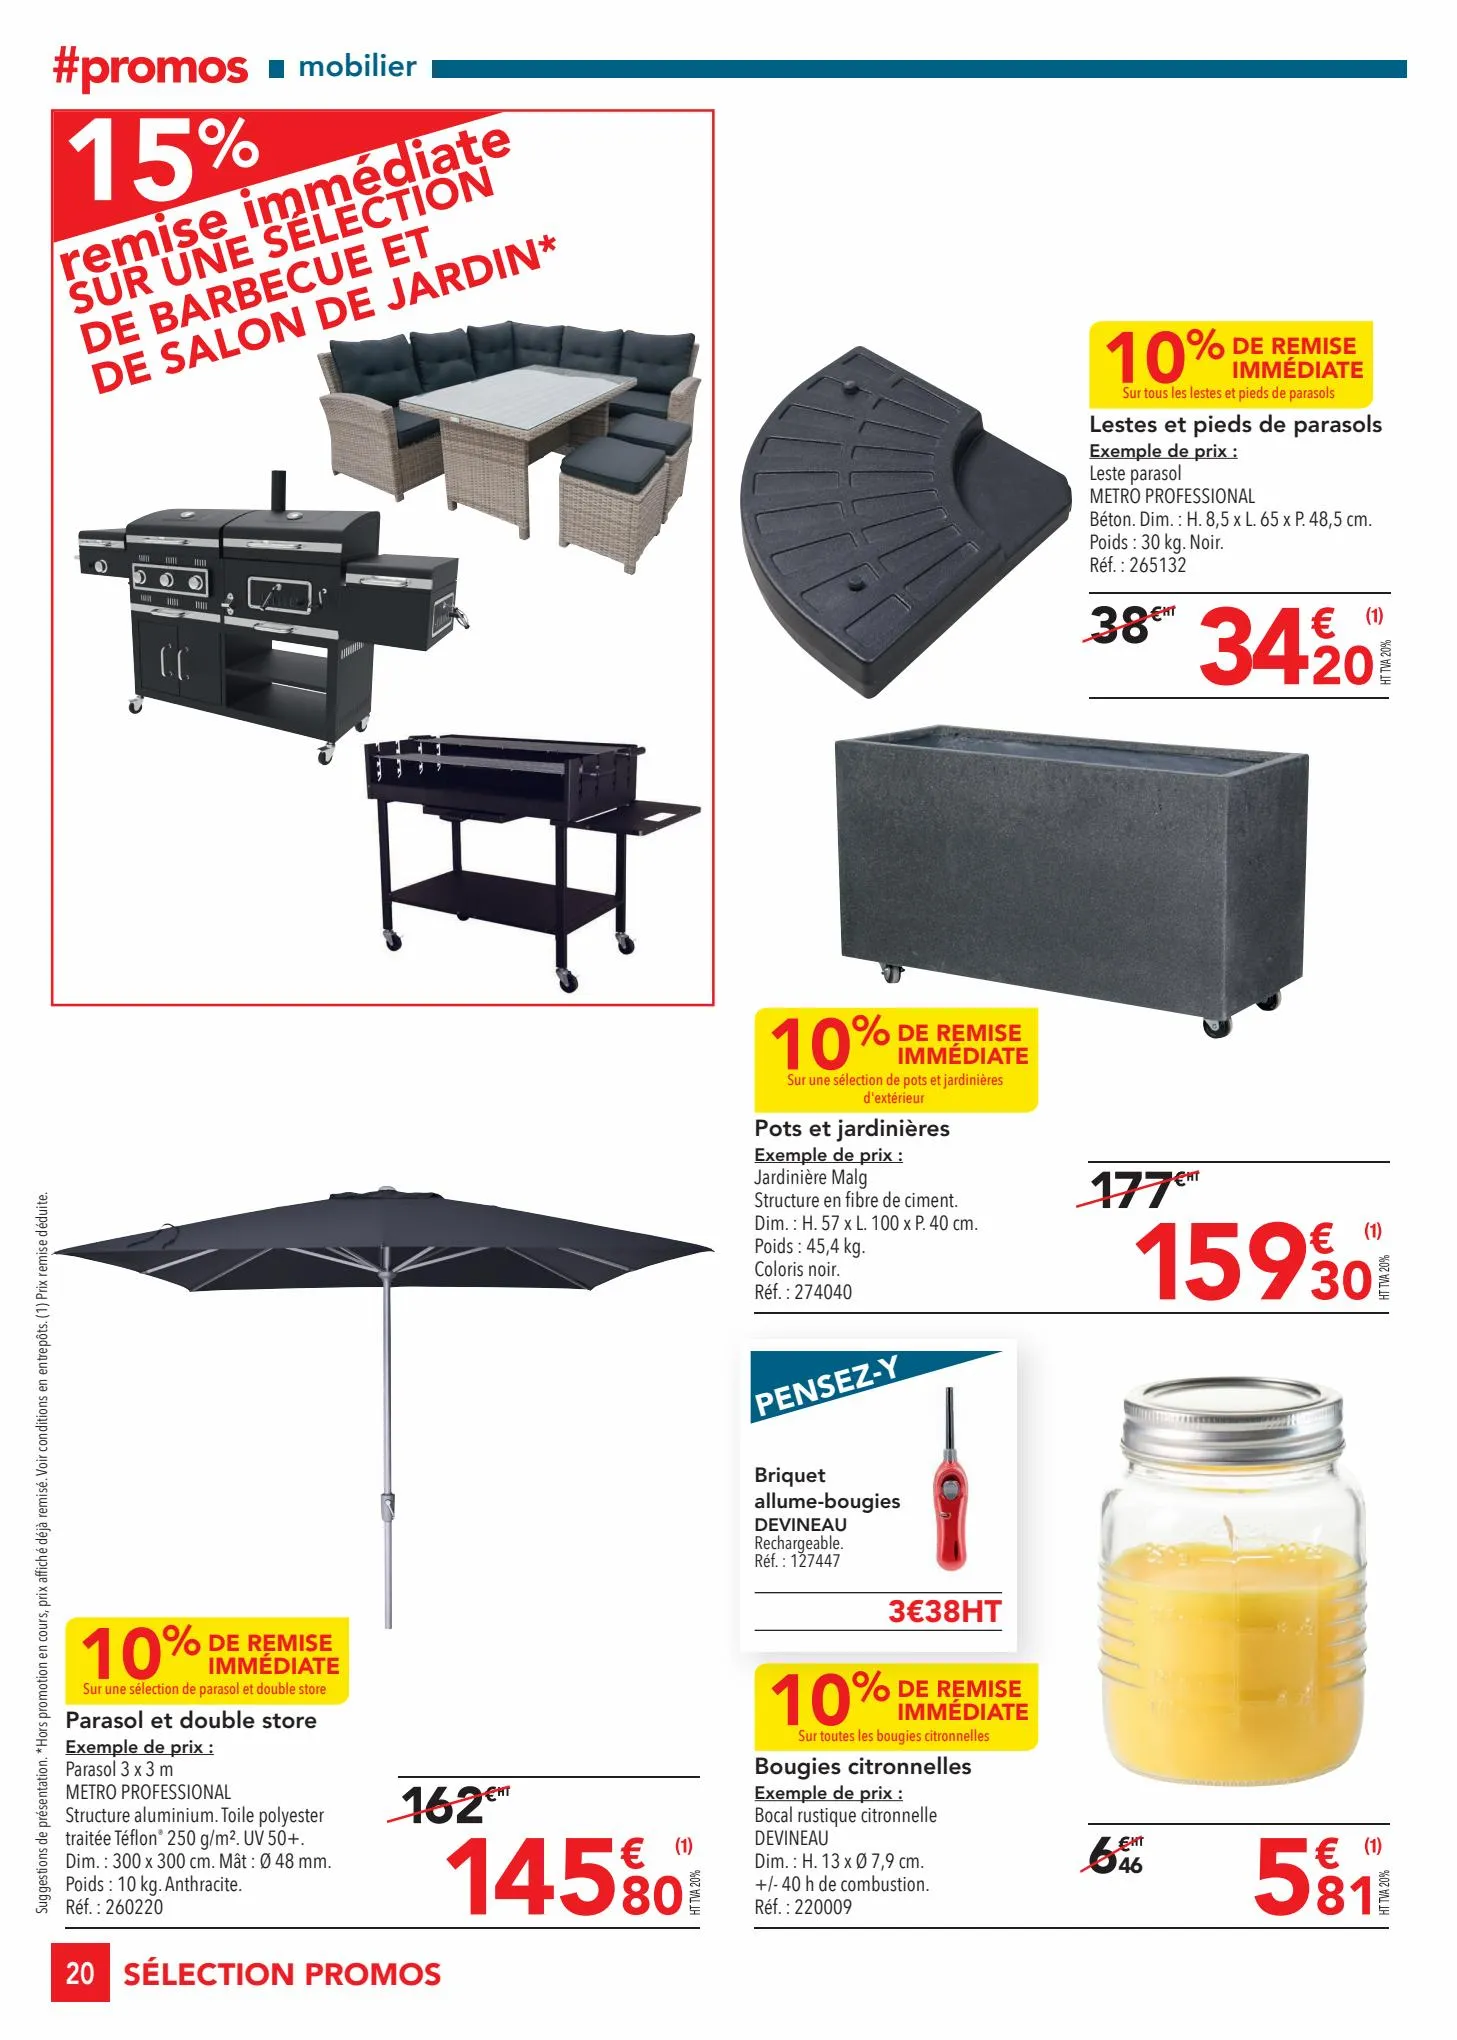 Catalogue Selection Promos Equipement, page 00020